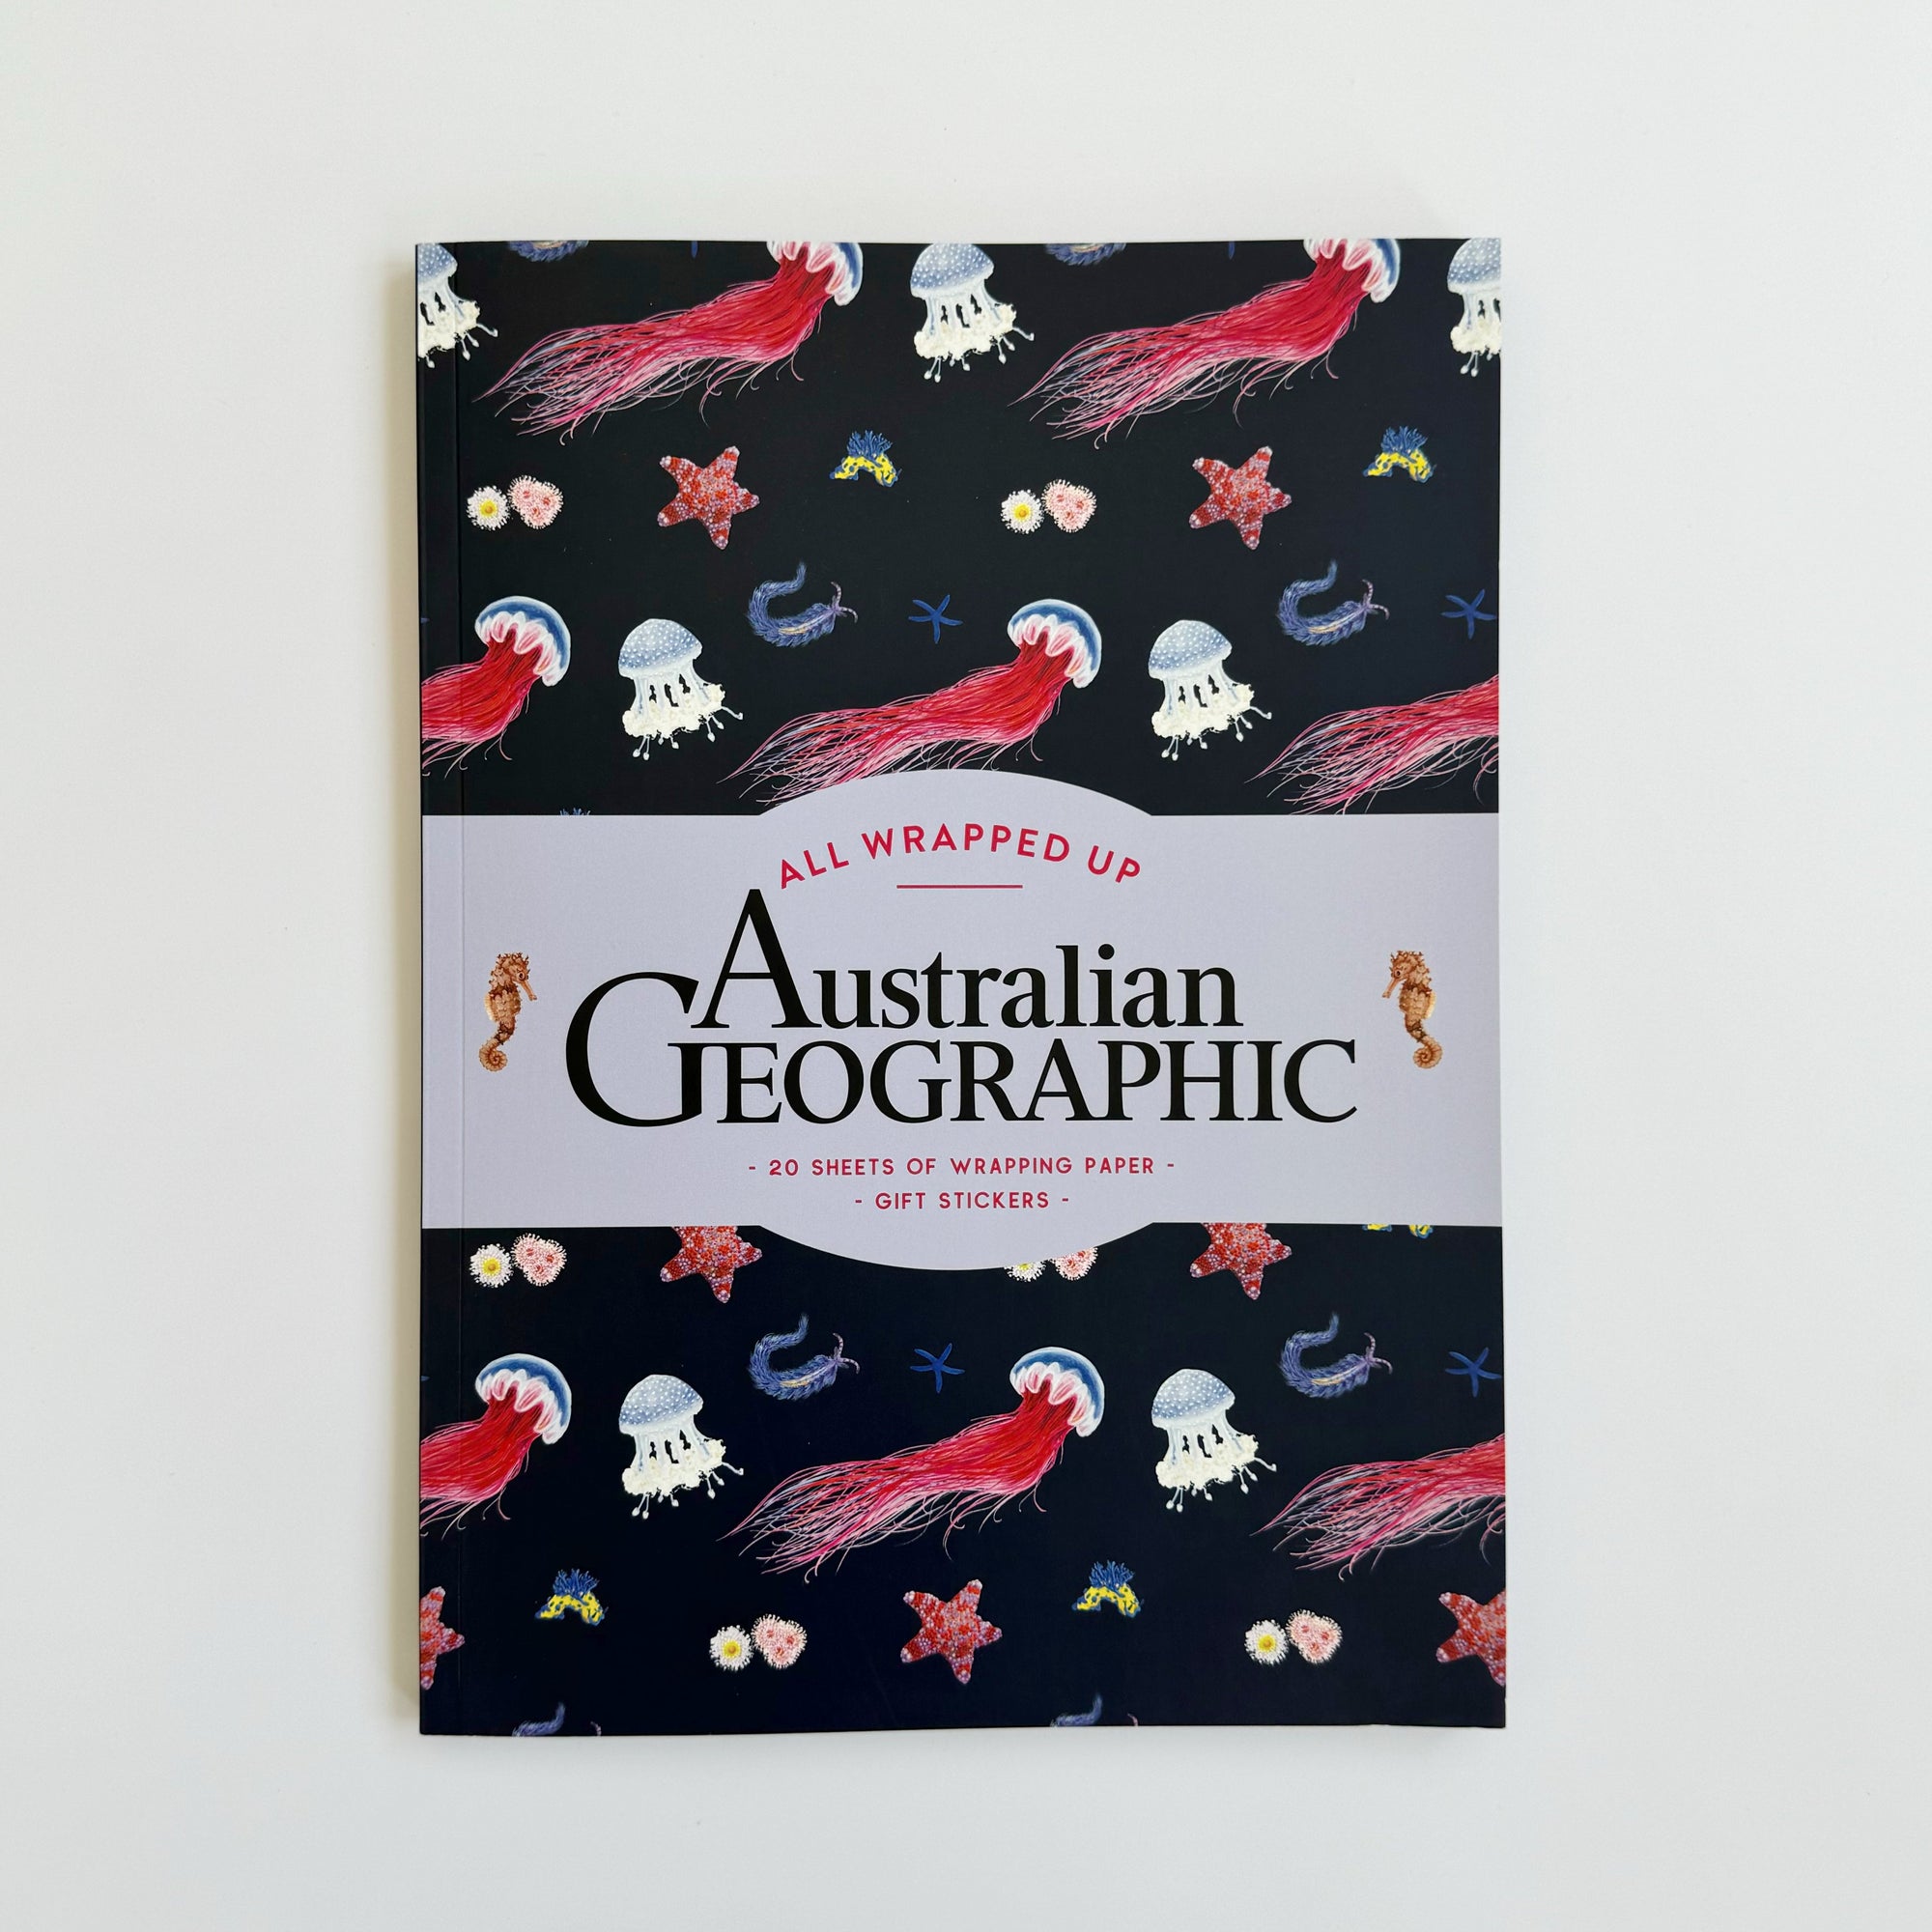 ALL WRAPPED UP: AUSTRALIAN GEOGRAPHIC